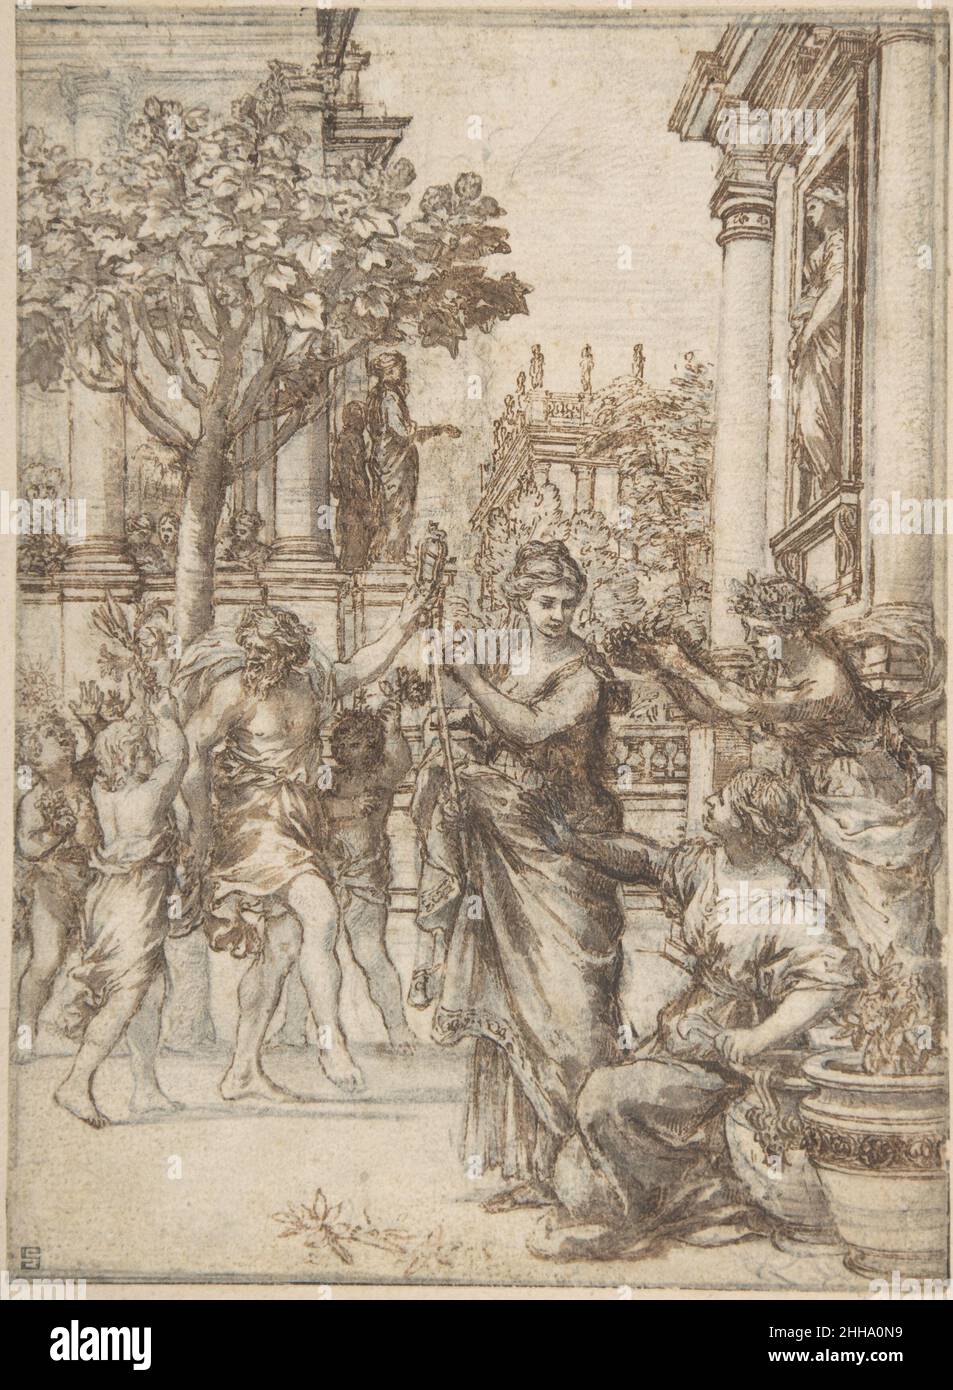 The Triumph of Nature Over Art (design for an engraving of 'De Florum Cultura') ca. 1633 Pietro da Cortona (Pietro Berrettini) Italian This drawing by the Baroque master Pietro da Cortona is a design for one of the illustrations in a treatise on gardening written by the Jesuit professor, Giovanni Battista Ferrari (1584-1655). The book, titled 'De Florum Cultura' (Rome, 1633), published this design engraved in reverse by Johann Friedrich Greuter (1590-1662). The artist illustrated an allegorical passage in Ferrari's text that tells of a contest between Nature and Art. Art, kneeling at the right Stock Photo